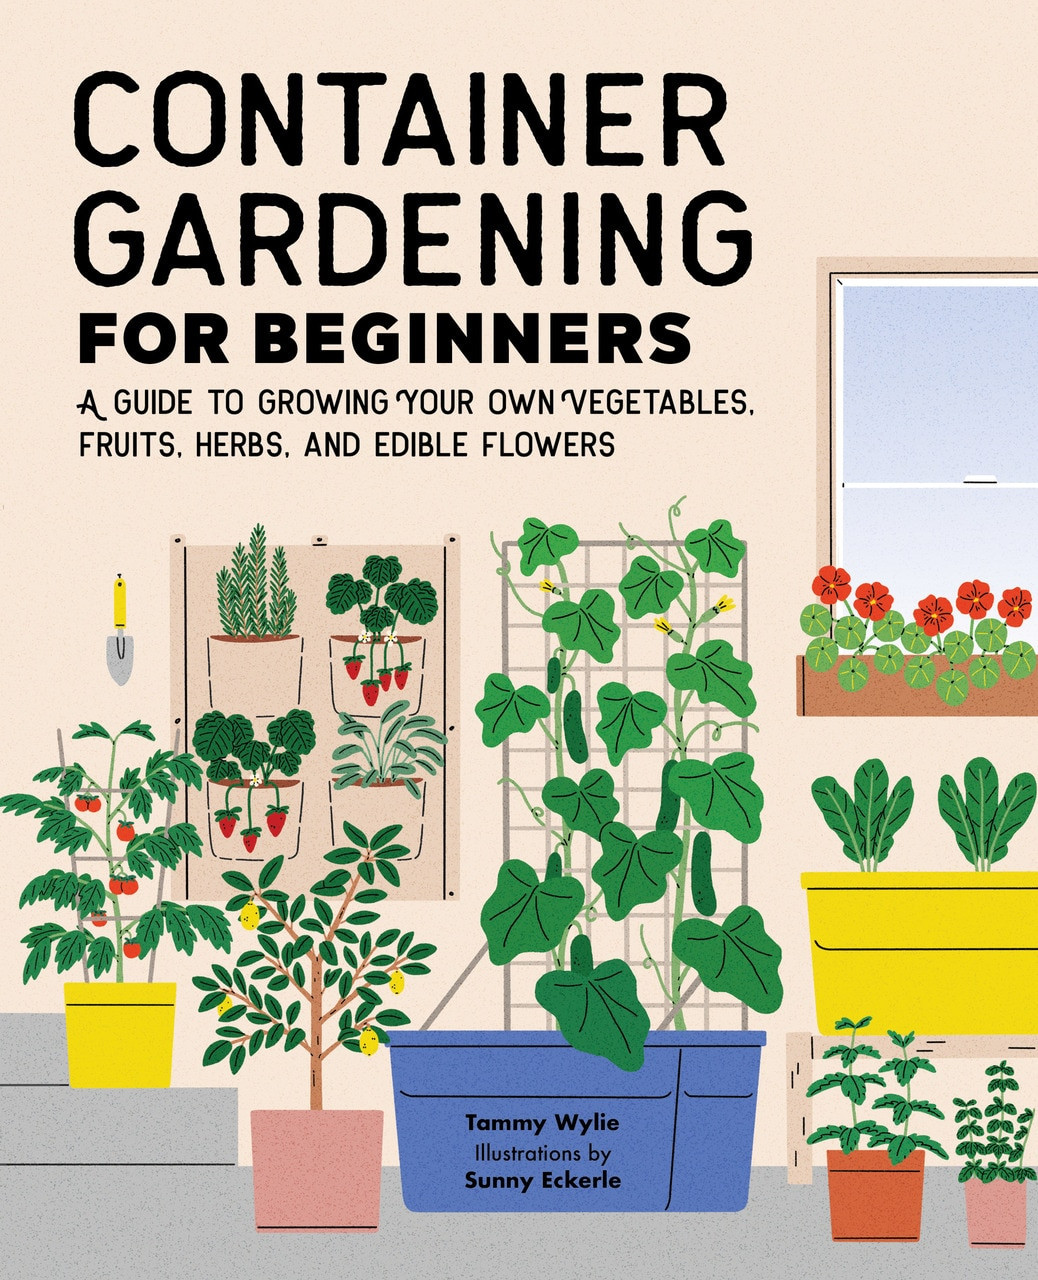 Container Gardening For Beginners (A Guide to Growing Your Own Vegetables, Fruits, Herbs, and Edible Flowers) by Tammy Wylie, 9781648768101